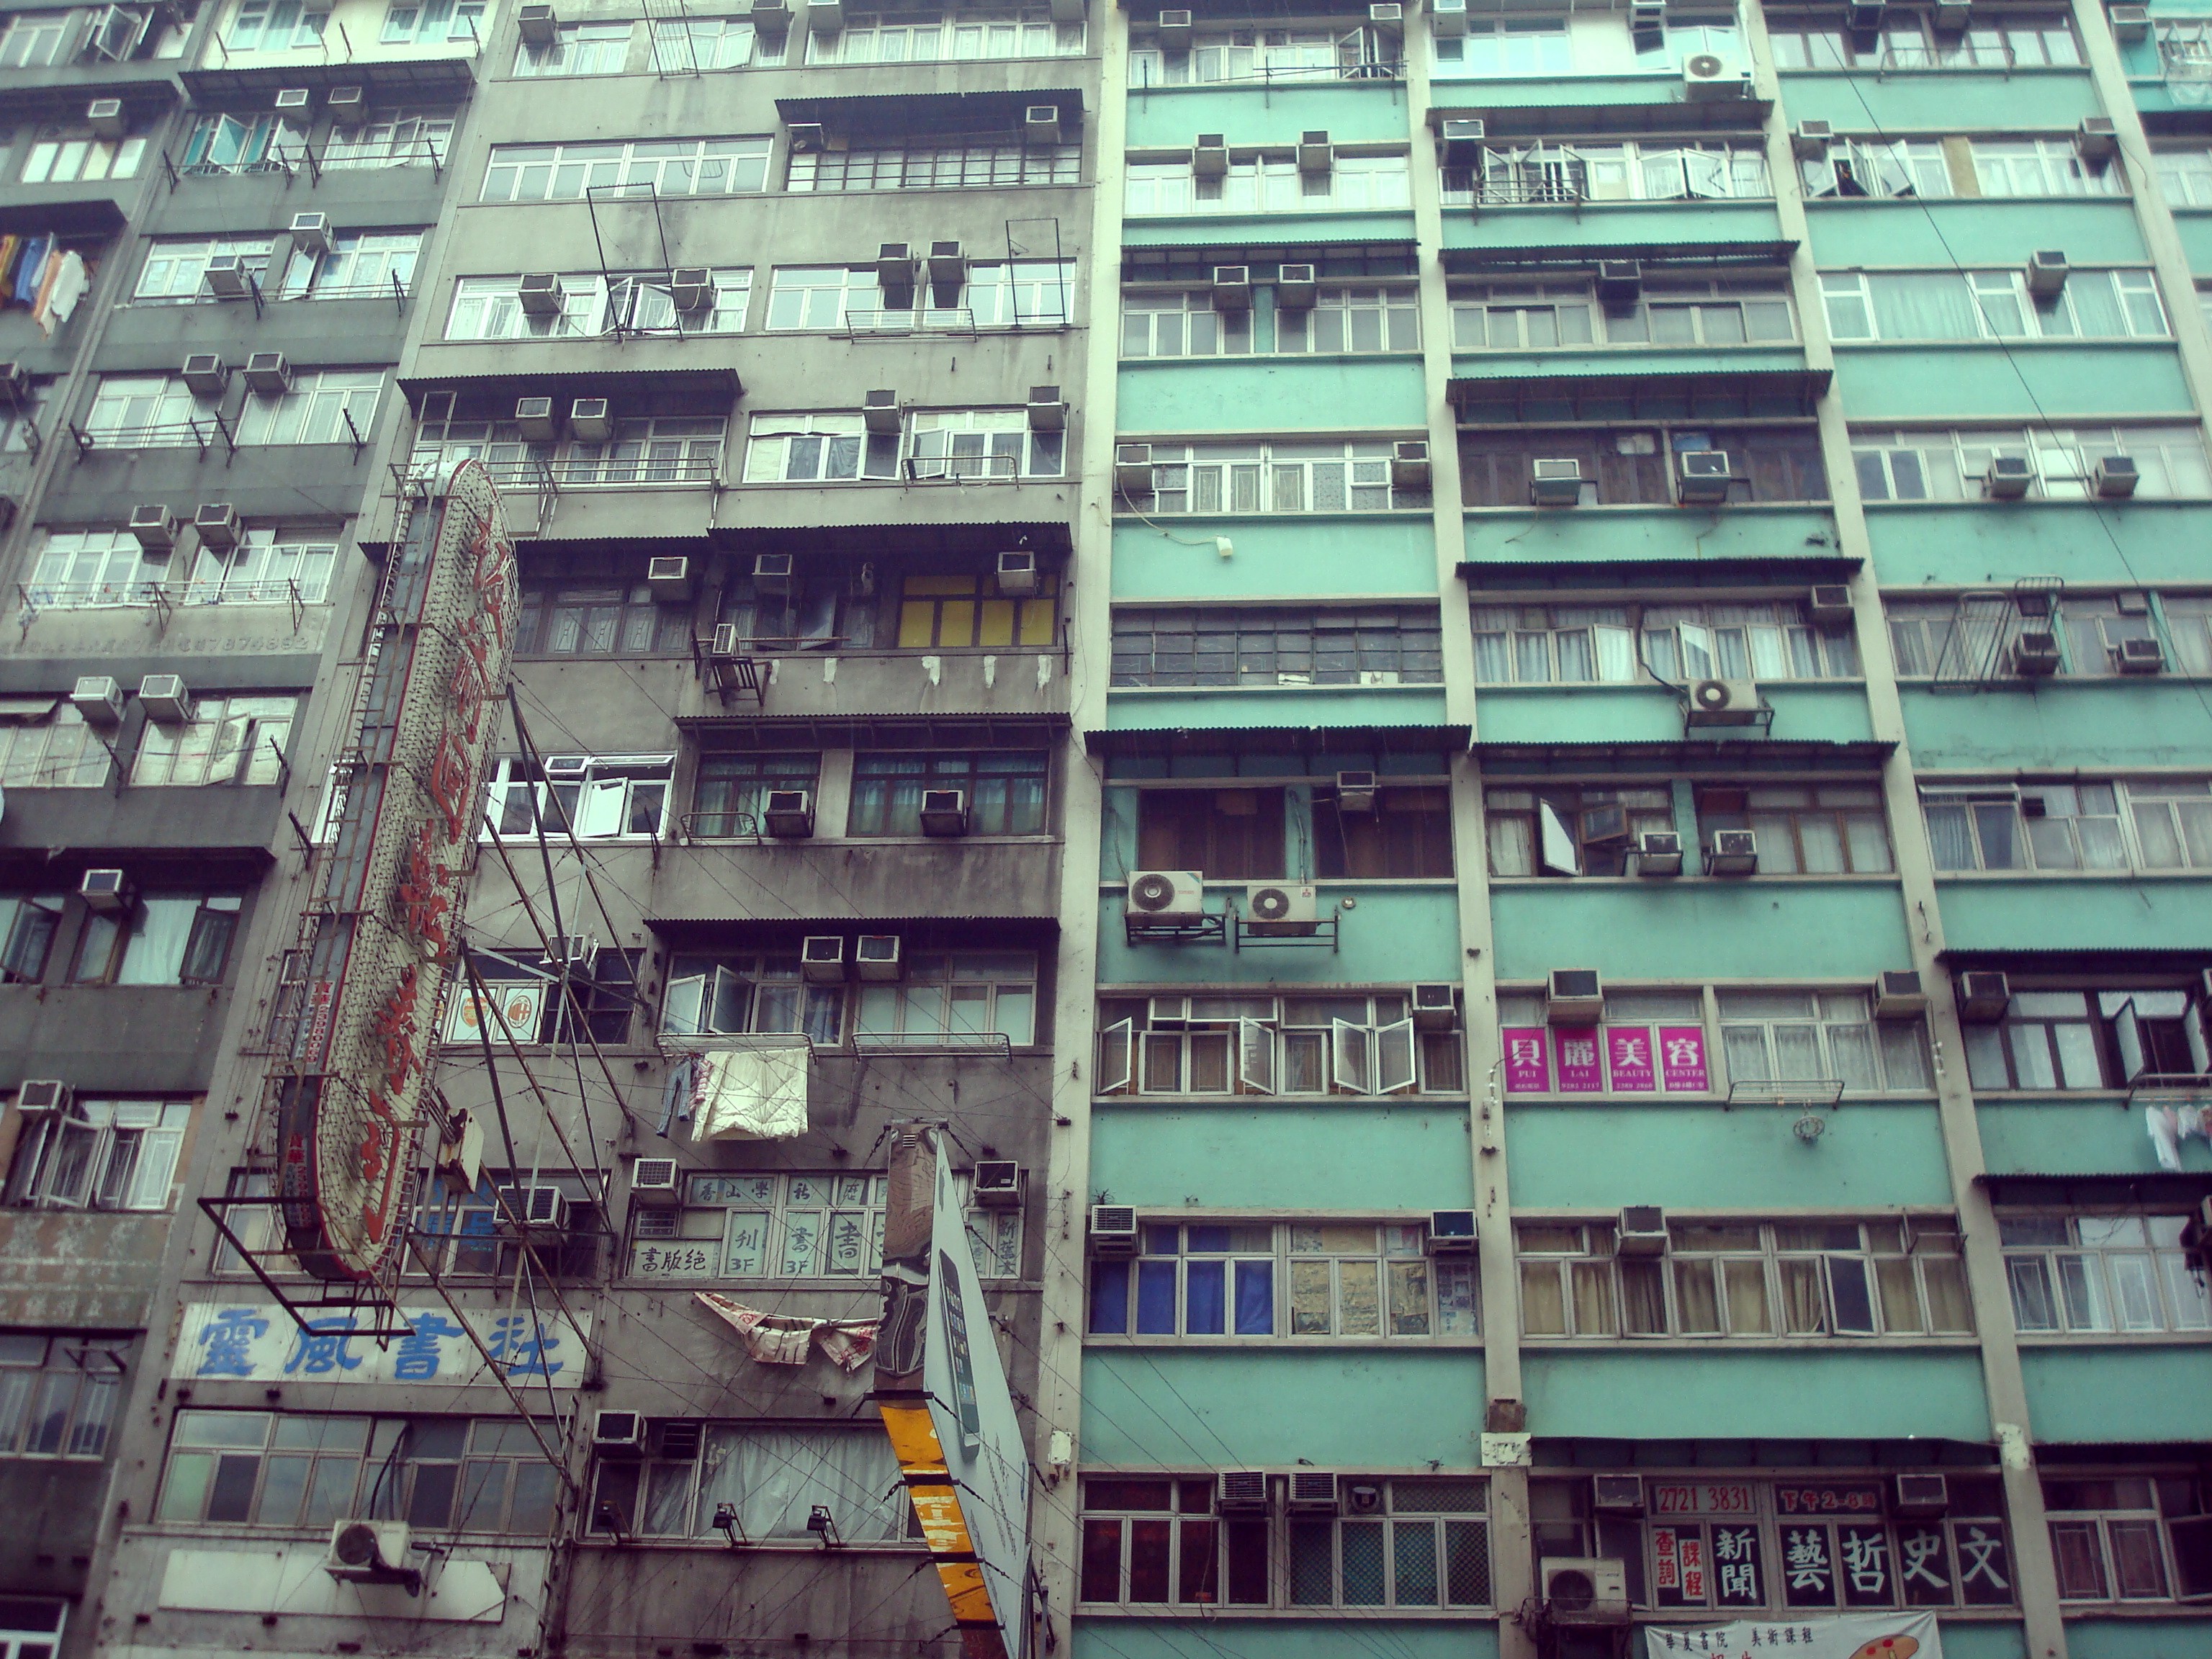 Hong Kong Apartments | something for the eyes . . . the photography ...